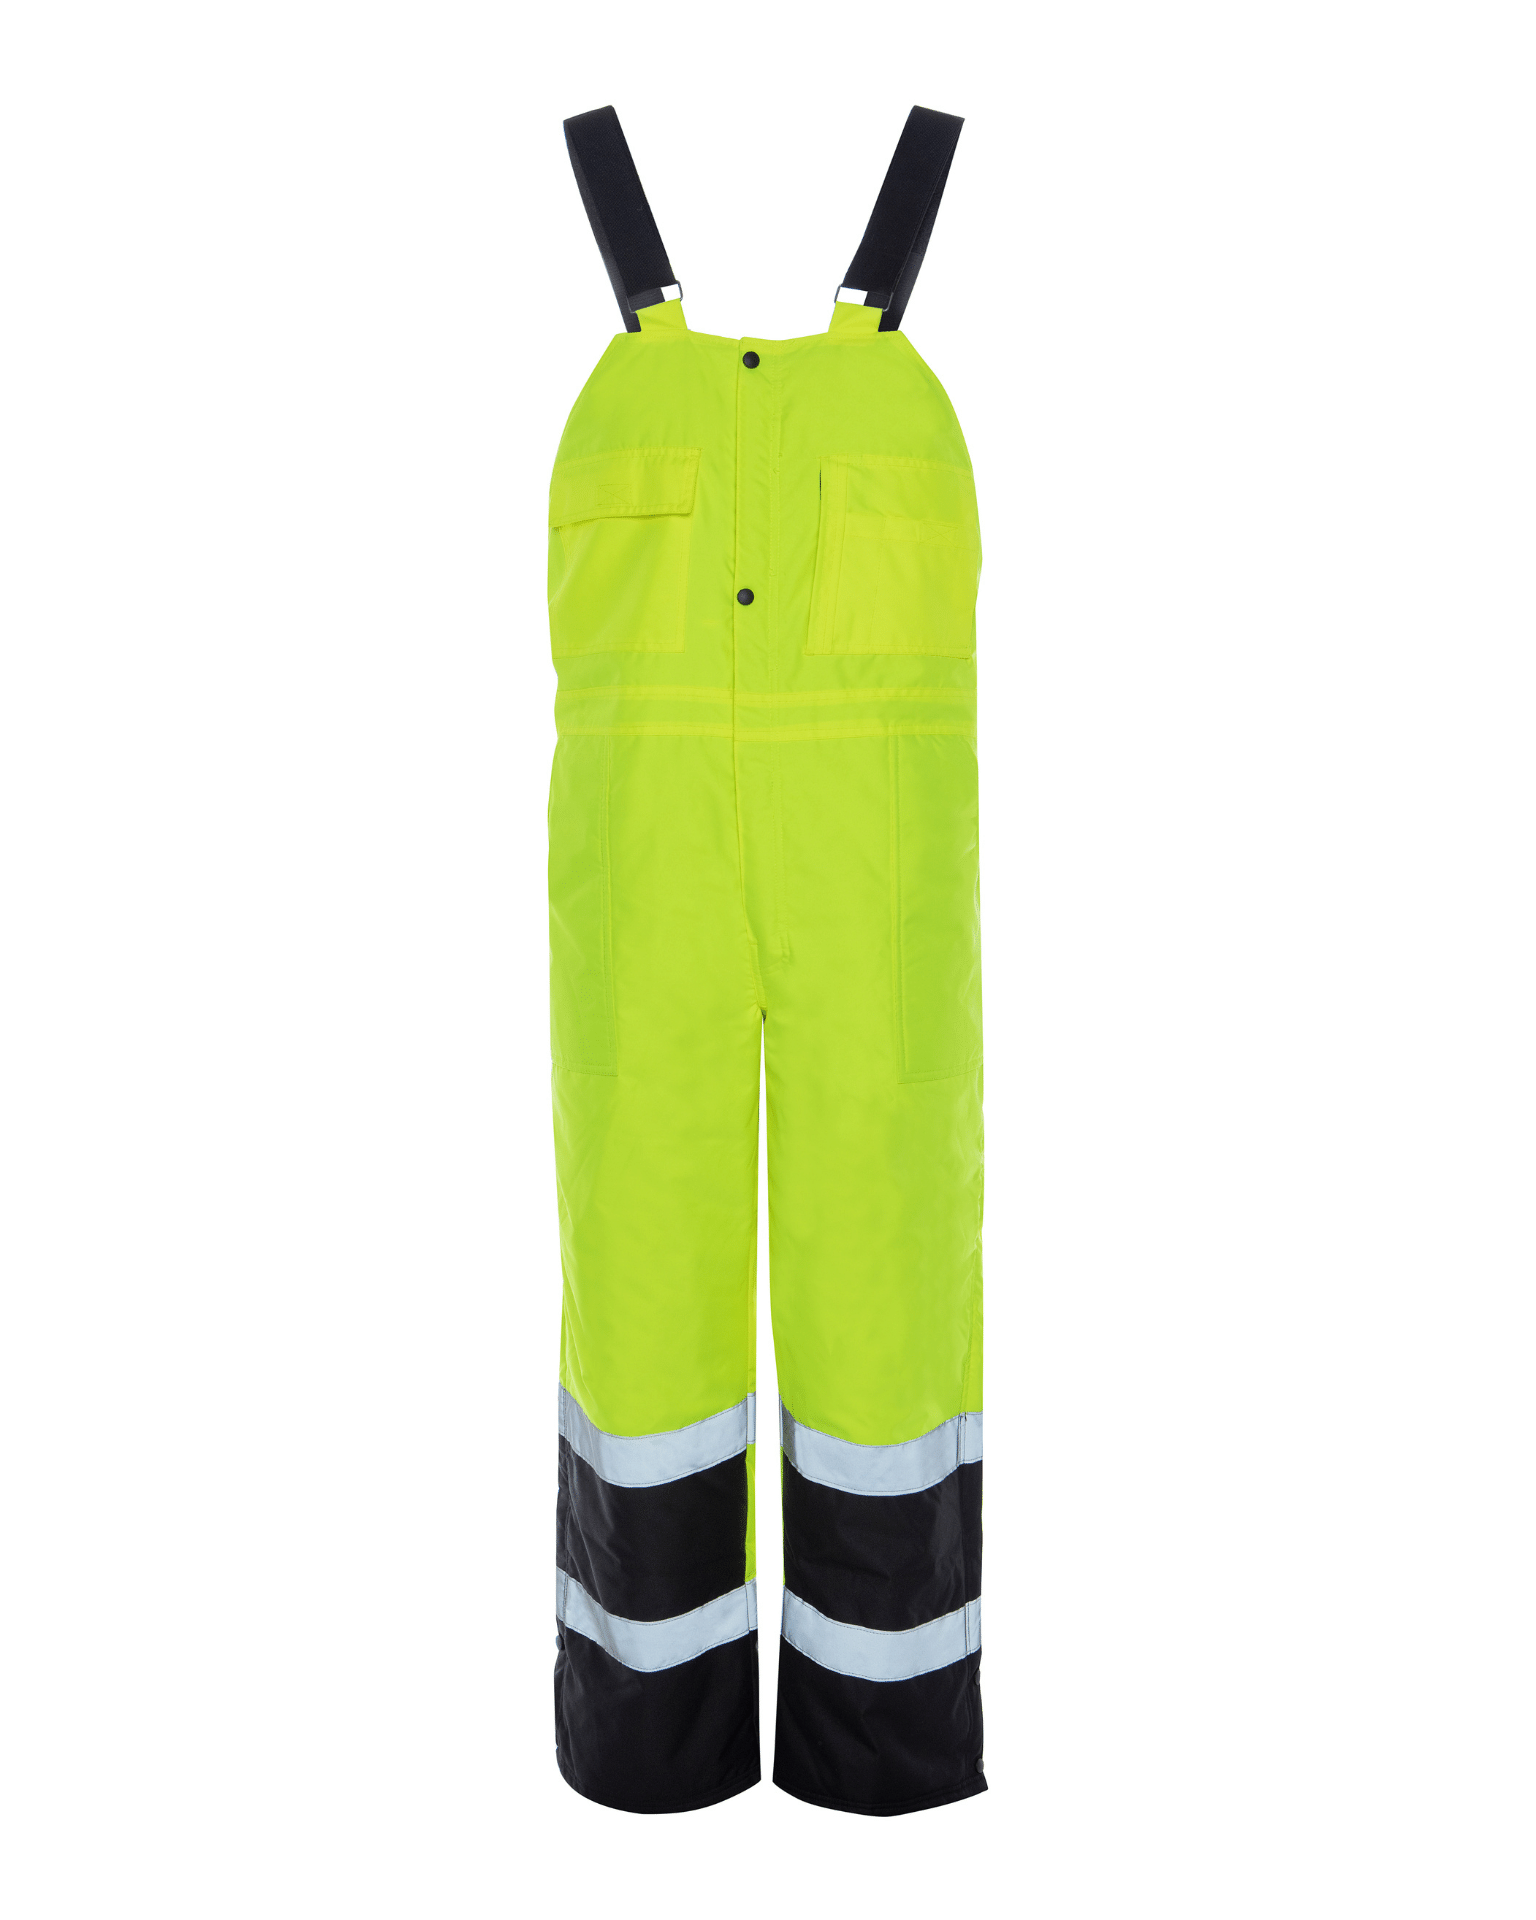 ANSI Class E High Visibility Contractor pants for men by Utility Pro